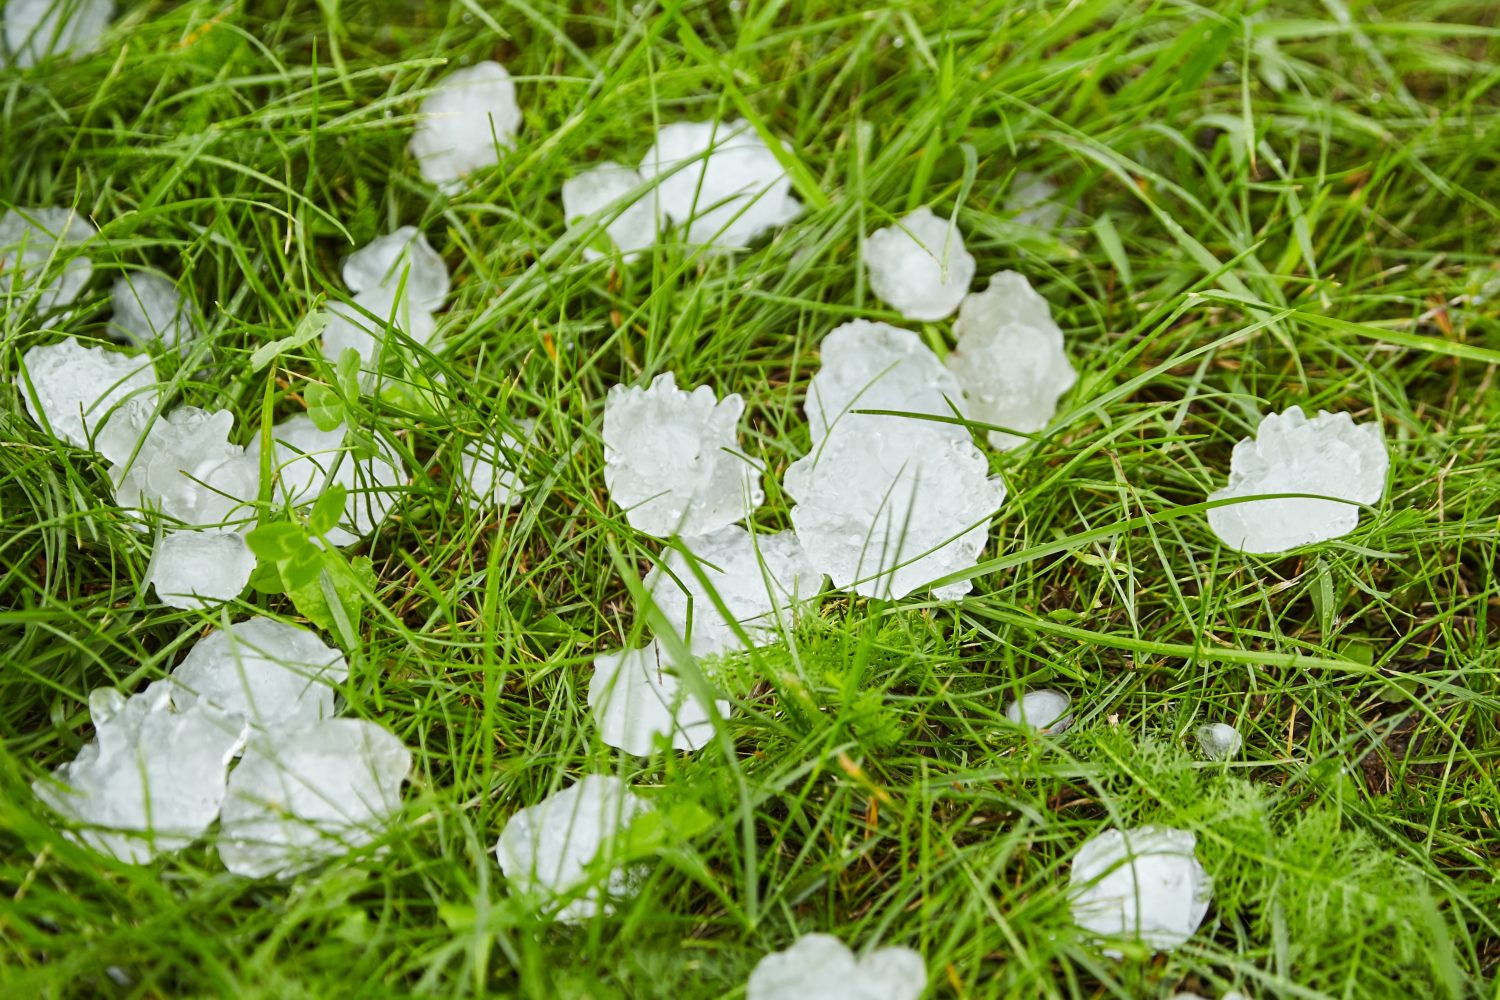 Hail on green grass after hailstorm. Lawn covered in hailstones after a hail storm. Form of precipitation falls